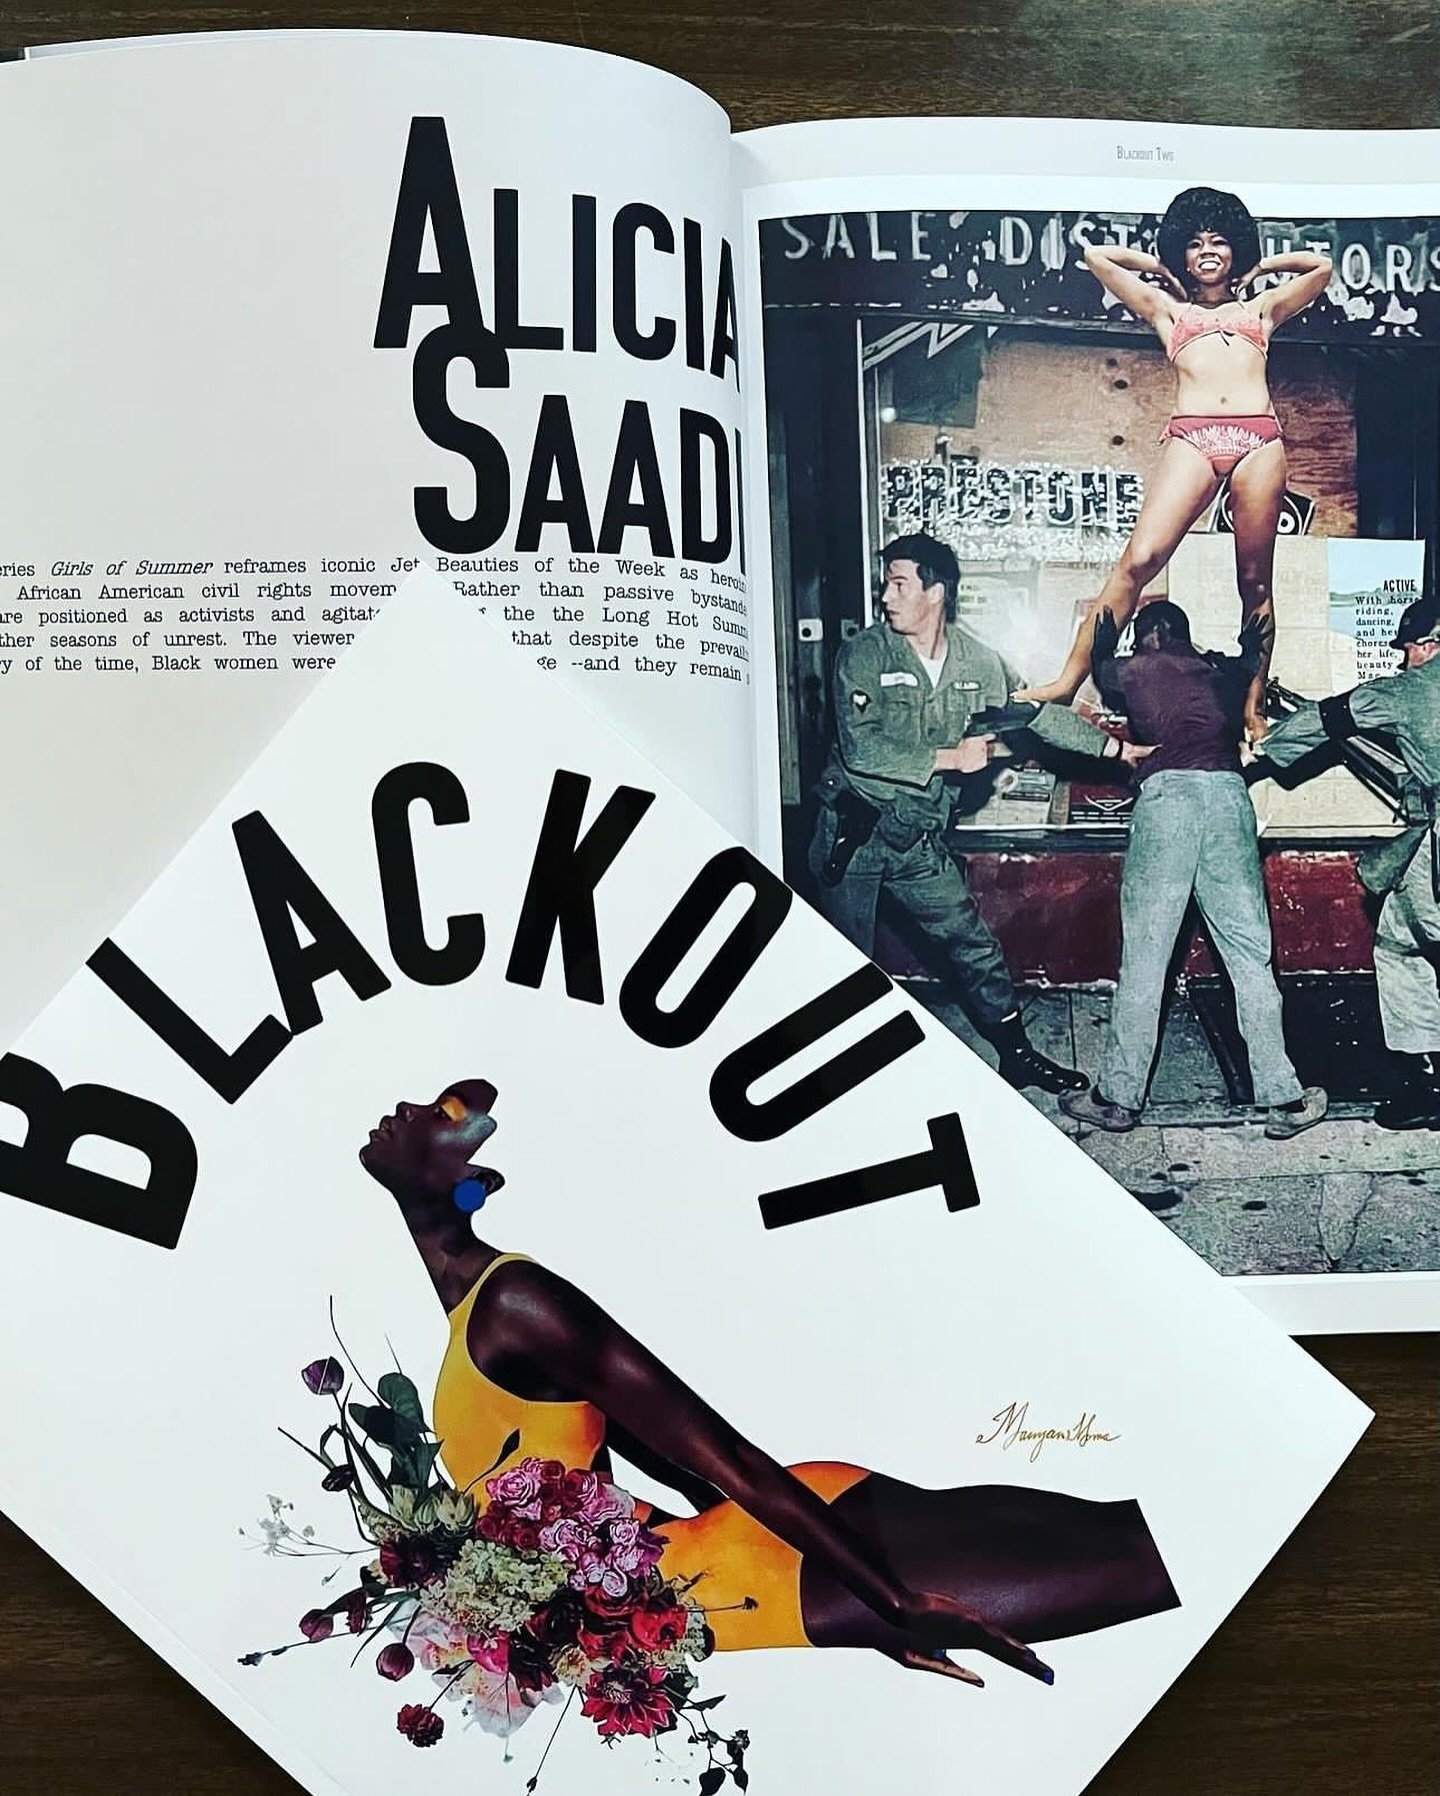 Heres a flic from a Blackout Two contributor 
📸 @alicia_undomesticated

Purchase copies on our site!